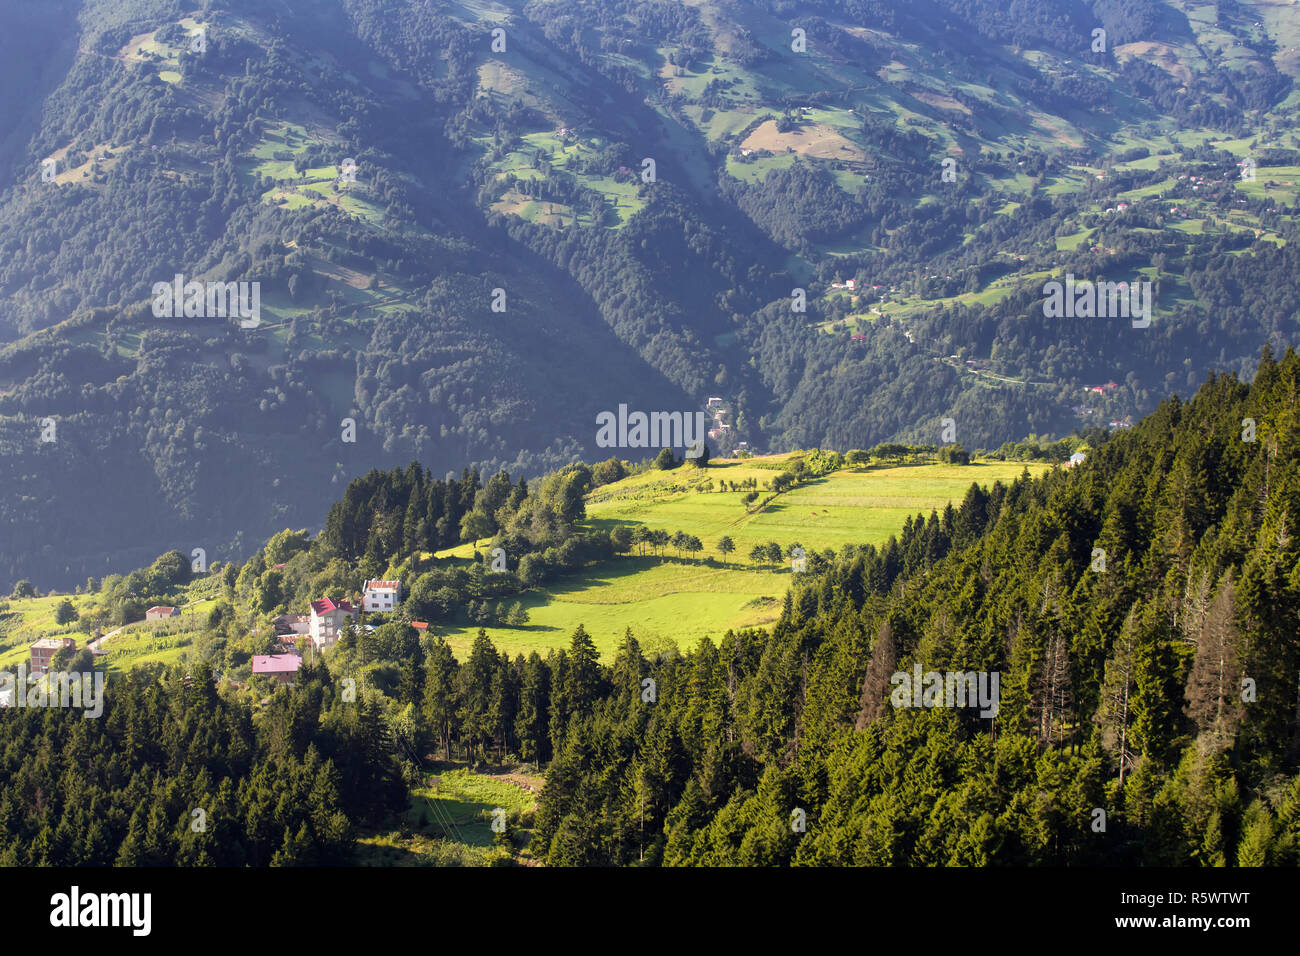 View of high plateau village, mountains, valleys and forest creating beautiful nature scene. The image is captured in Trabzon/Rize area of Black Sea r Stock Photo